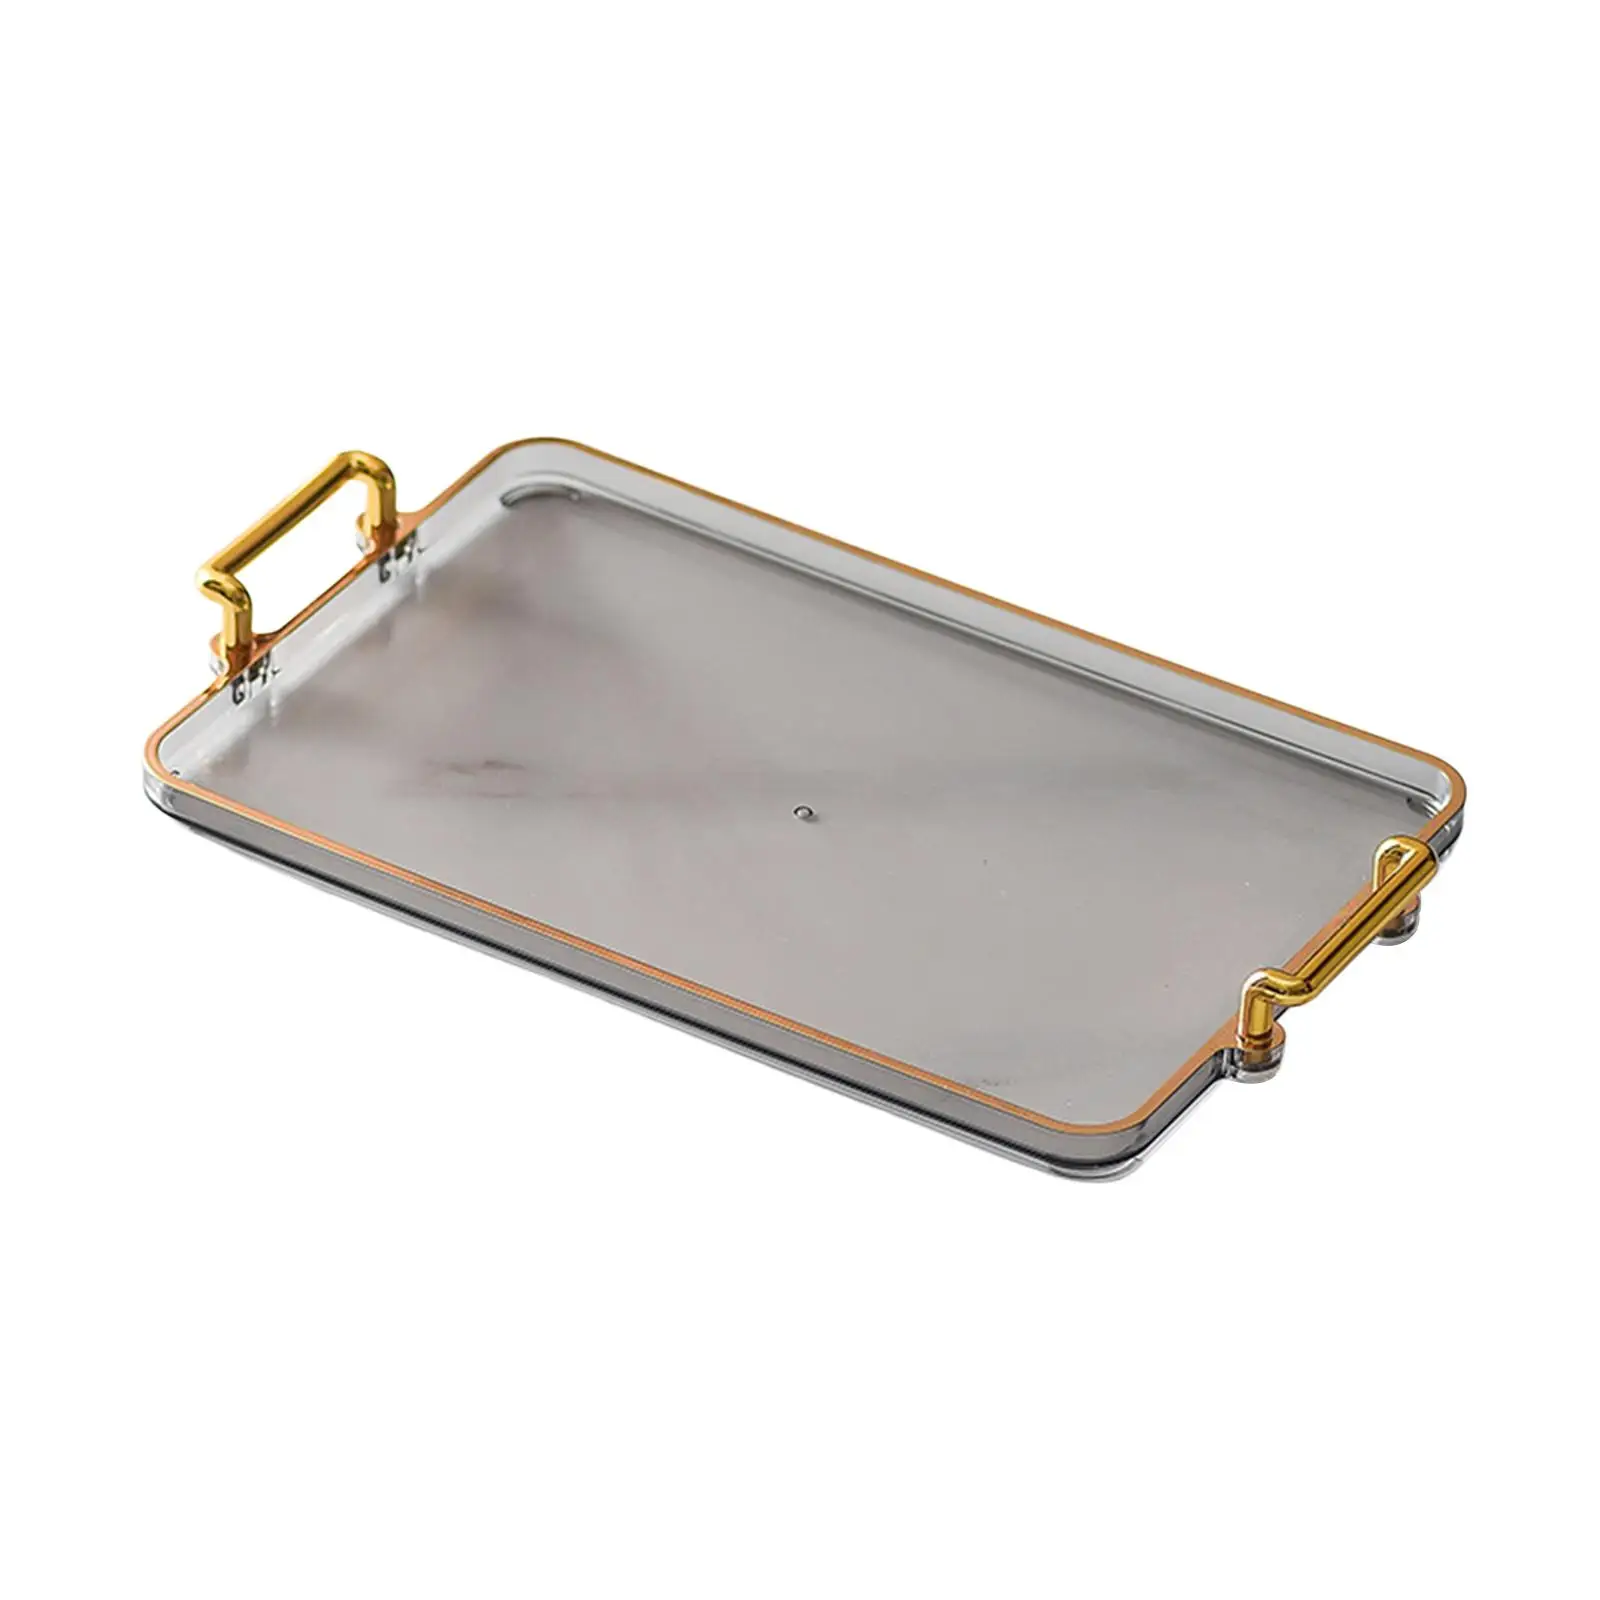 Luxury Home Serving Tray Countertop Organizer Rectangular Food Cup Serving Tray